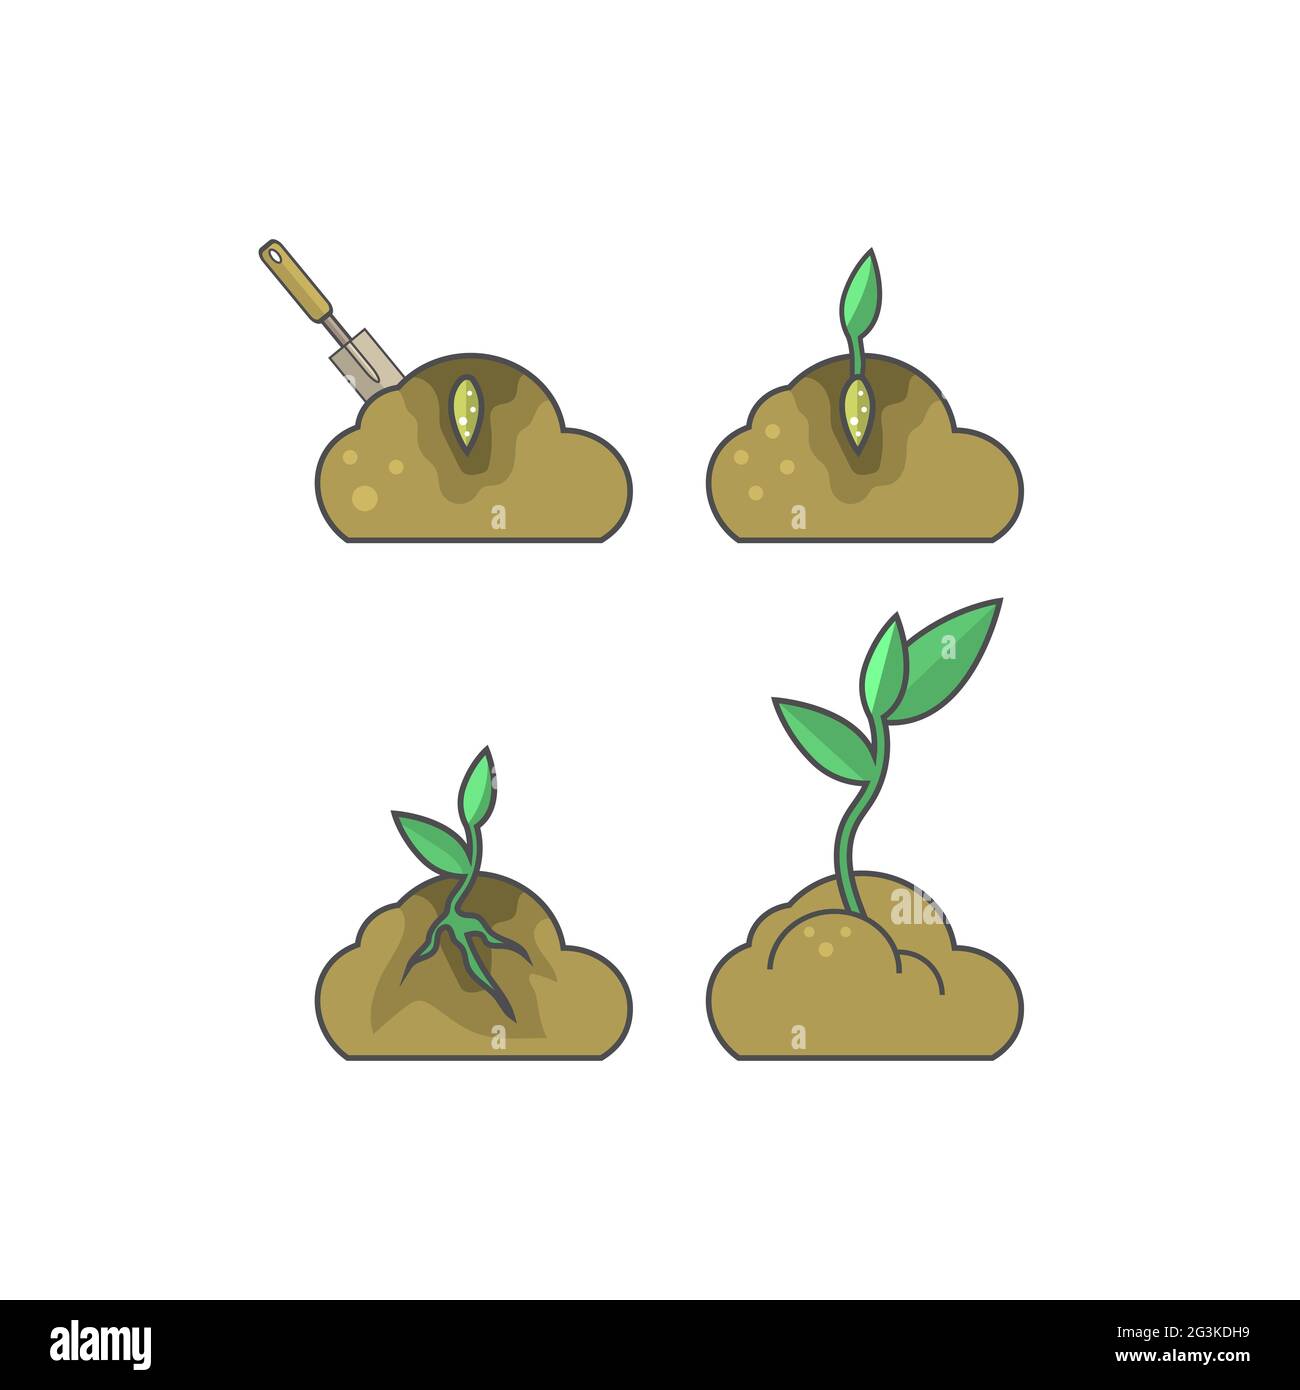 How to put plant. Stages of growth Stock Photo